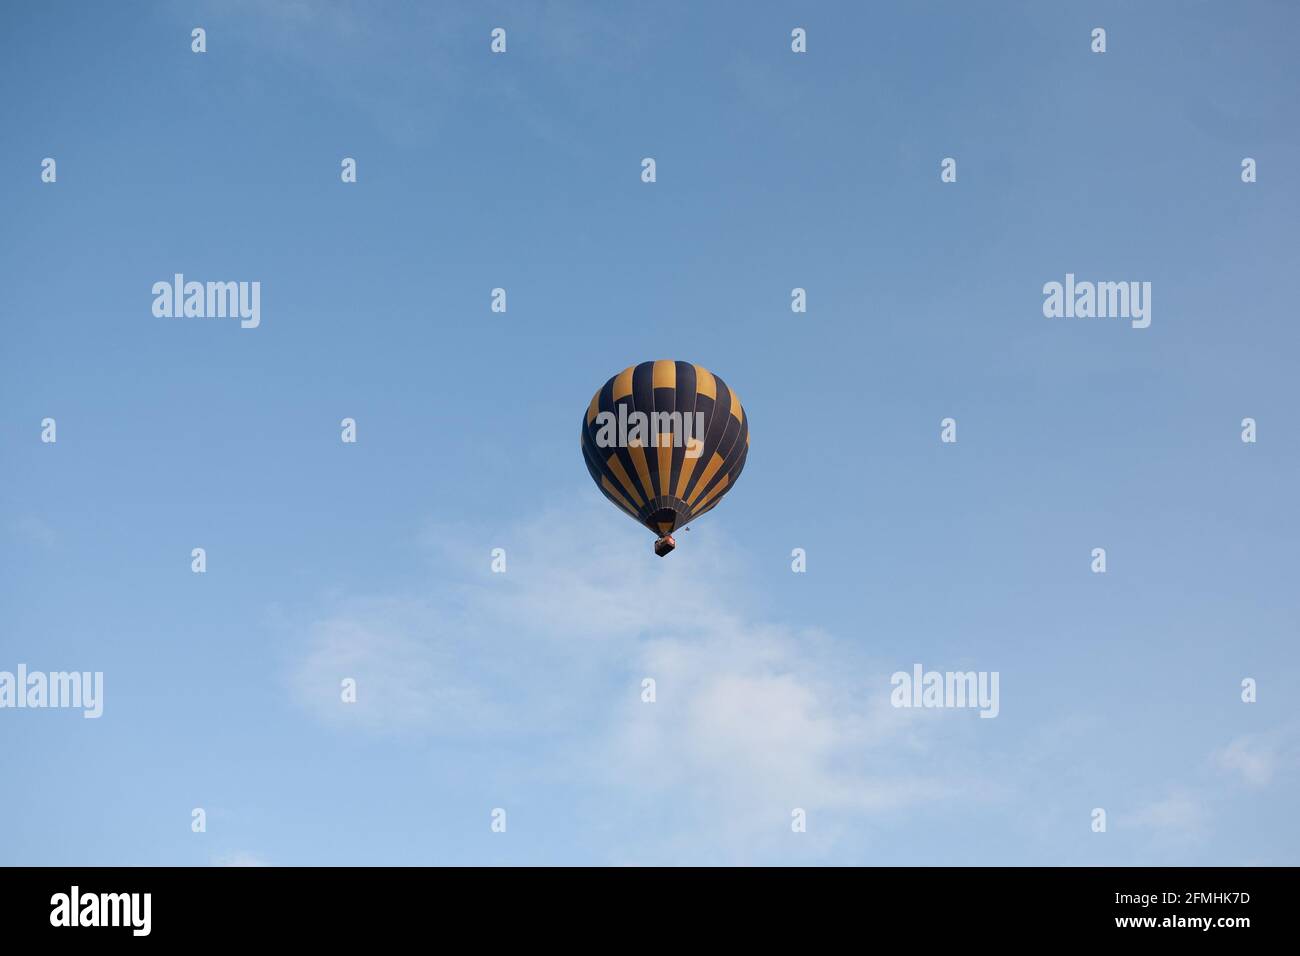 Hot Air Balloon in blue sky Banque D'Images